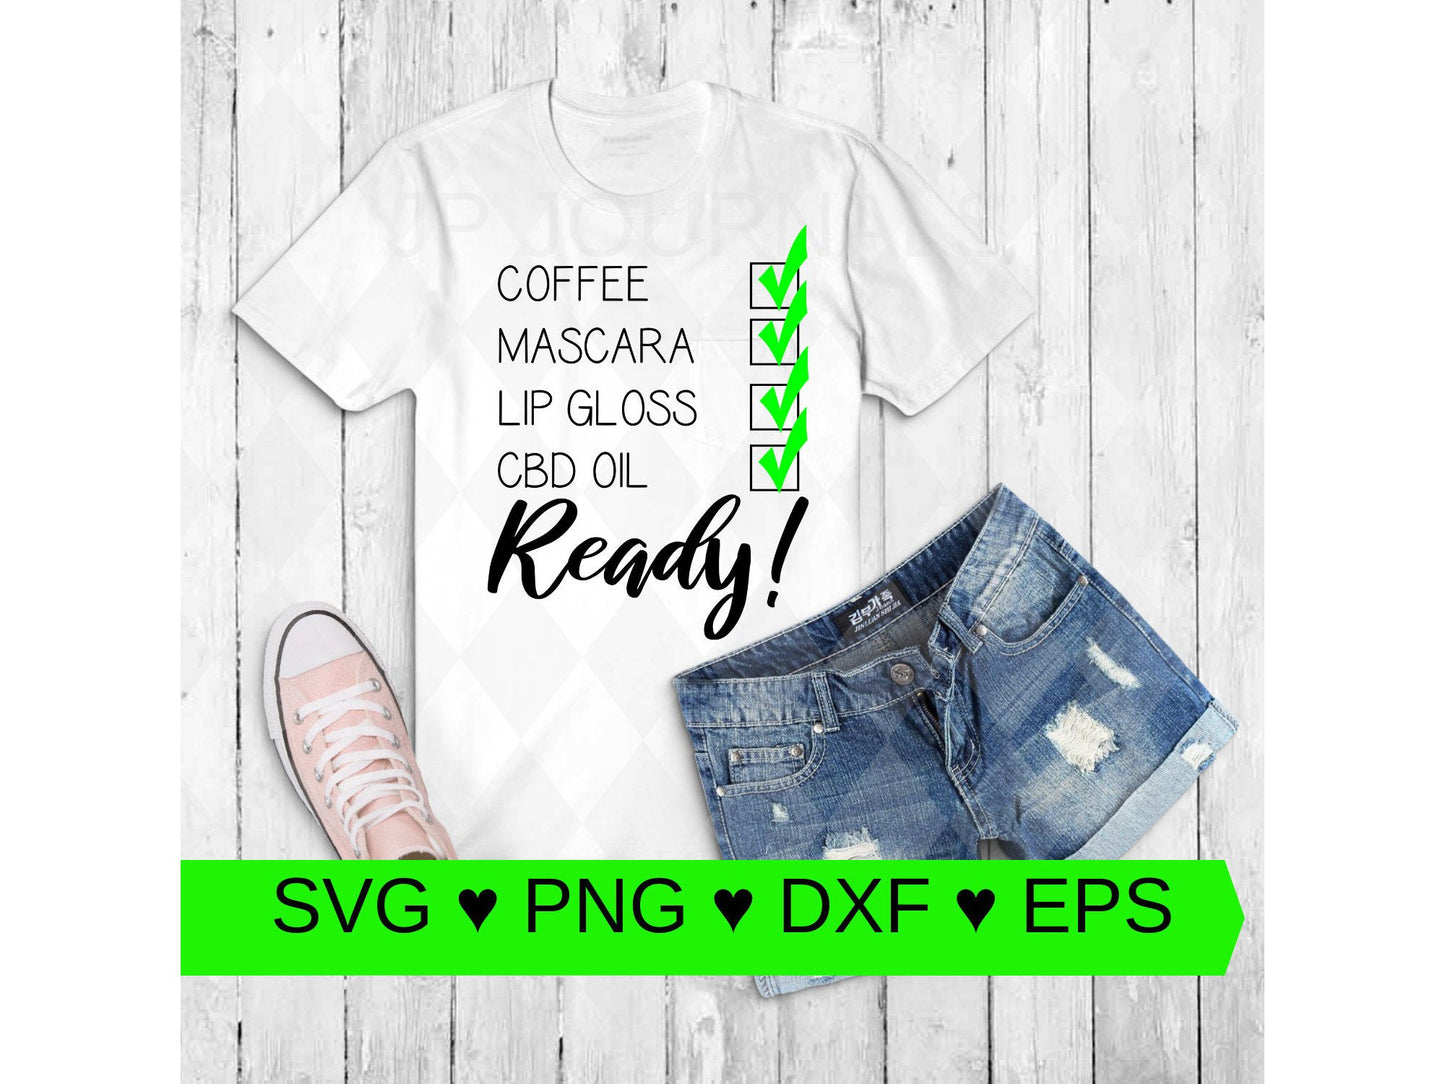 Ready Checklist (Coffee Mascara Lip Gloss CBD Oil) - svg png dxf eps Instant Download - Make Your Own Shirts,  Mugs, Gifts & More